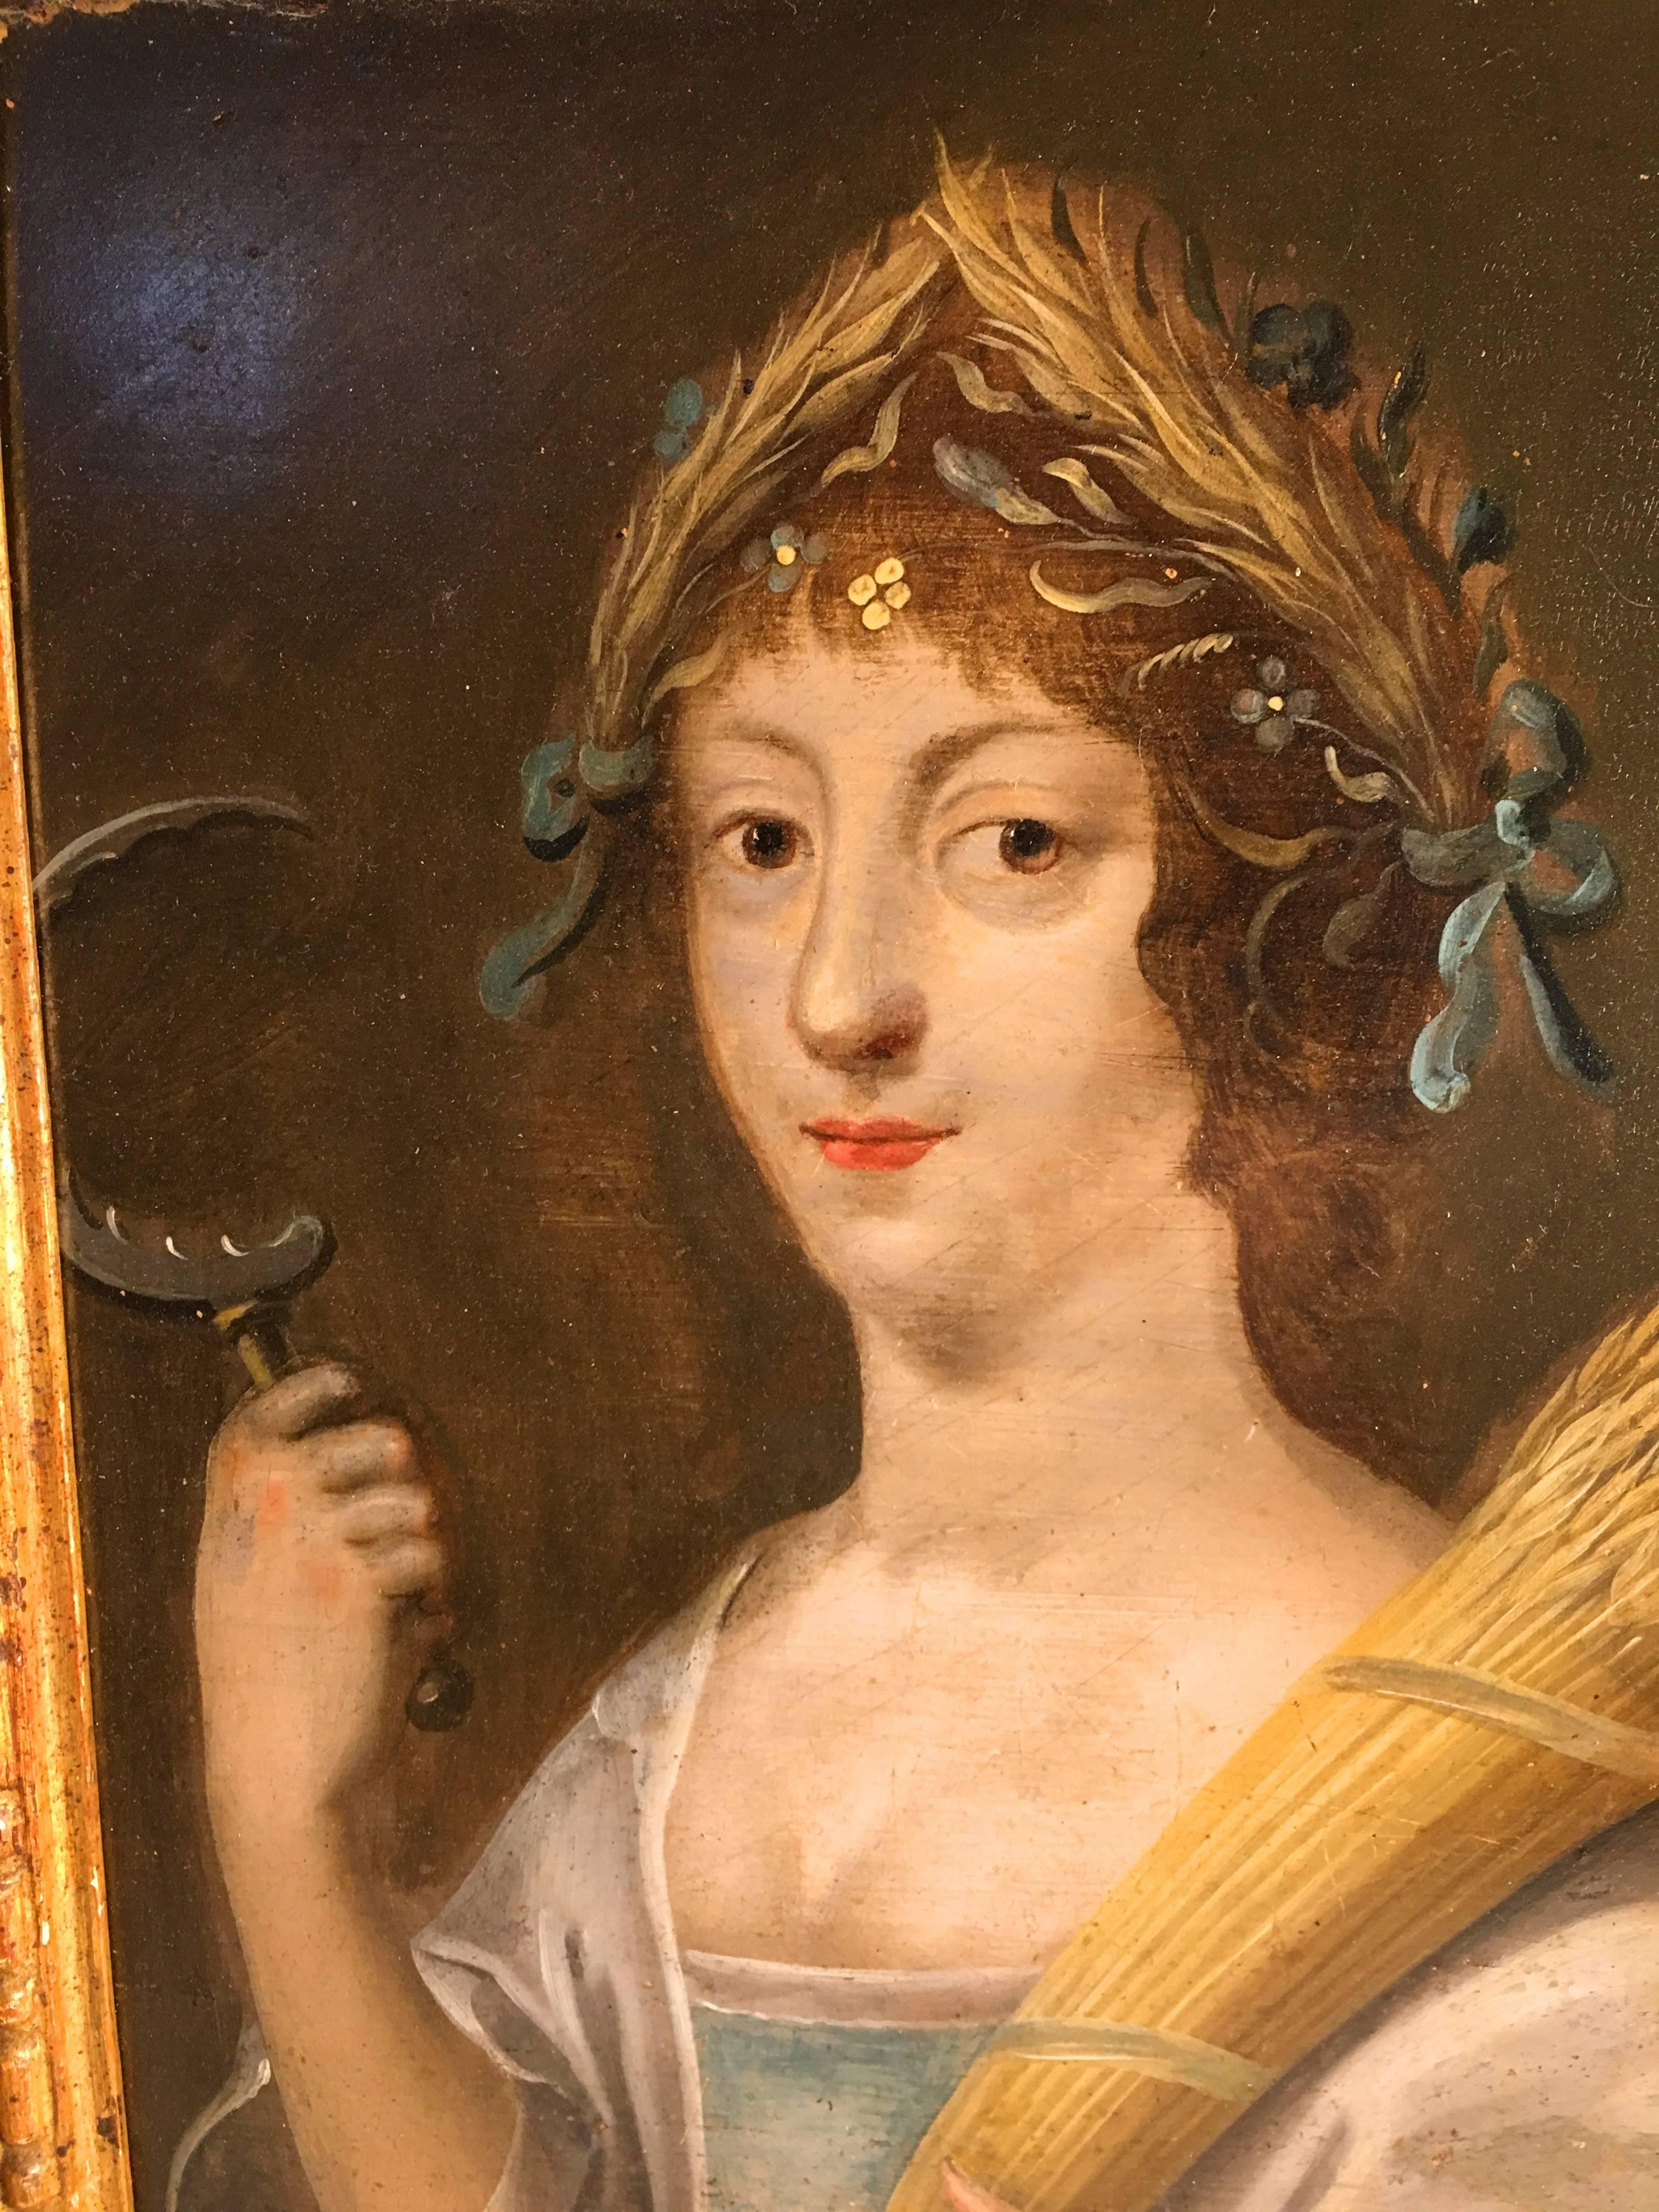 An early 18th century oil-on-board portrait of the Goddess Demeter, holding a scythe and a sheaf of wheat, with a wreath of grain as a crown on her head, in period costume. In an antique giltwood frame.